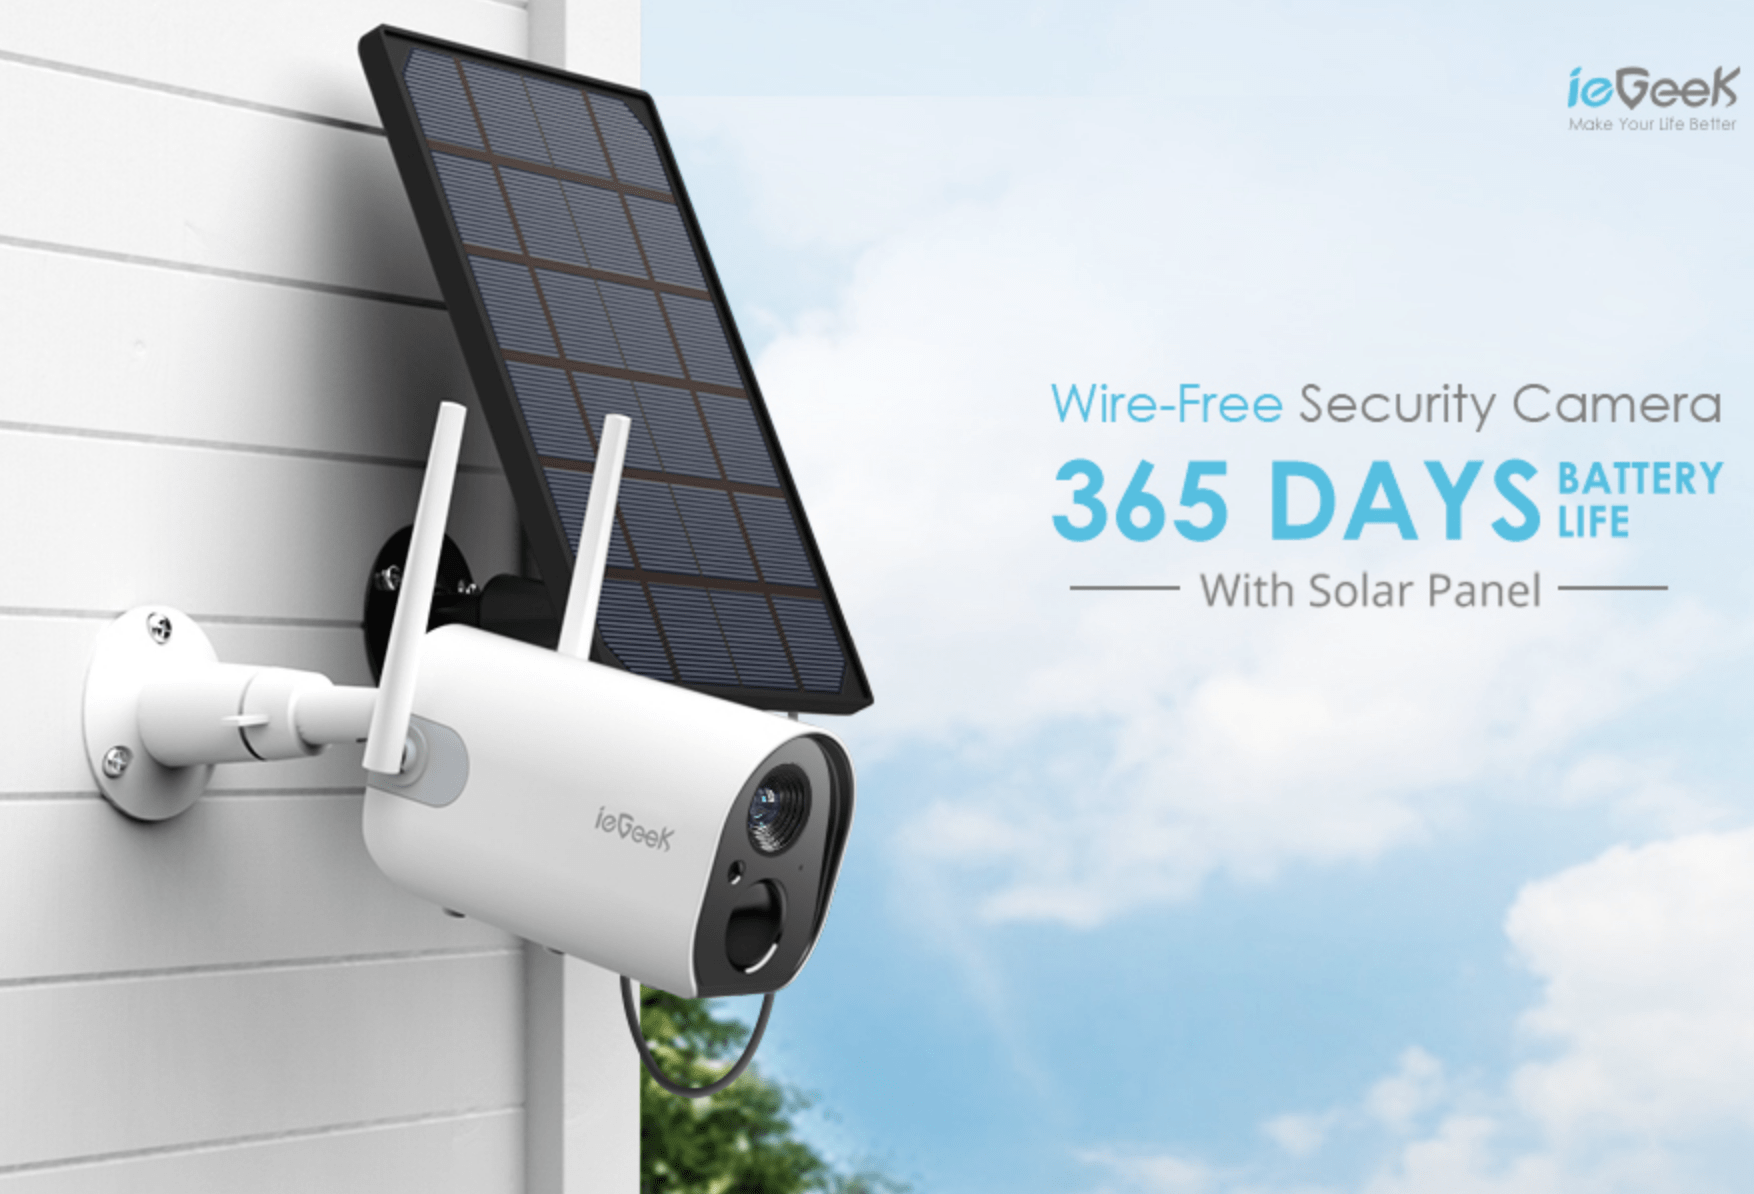 ieGeek Solar Security Camera (review & price comparison) ReviewAffi